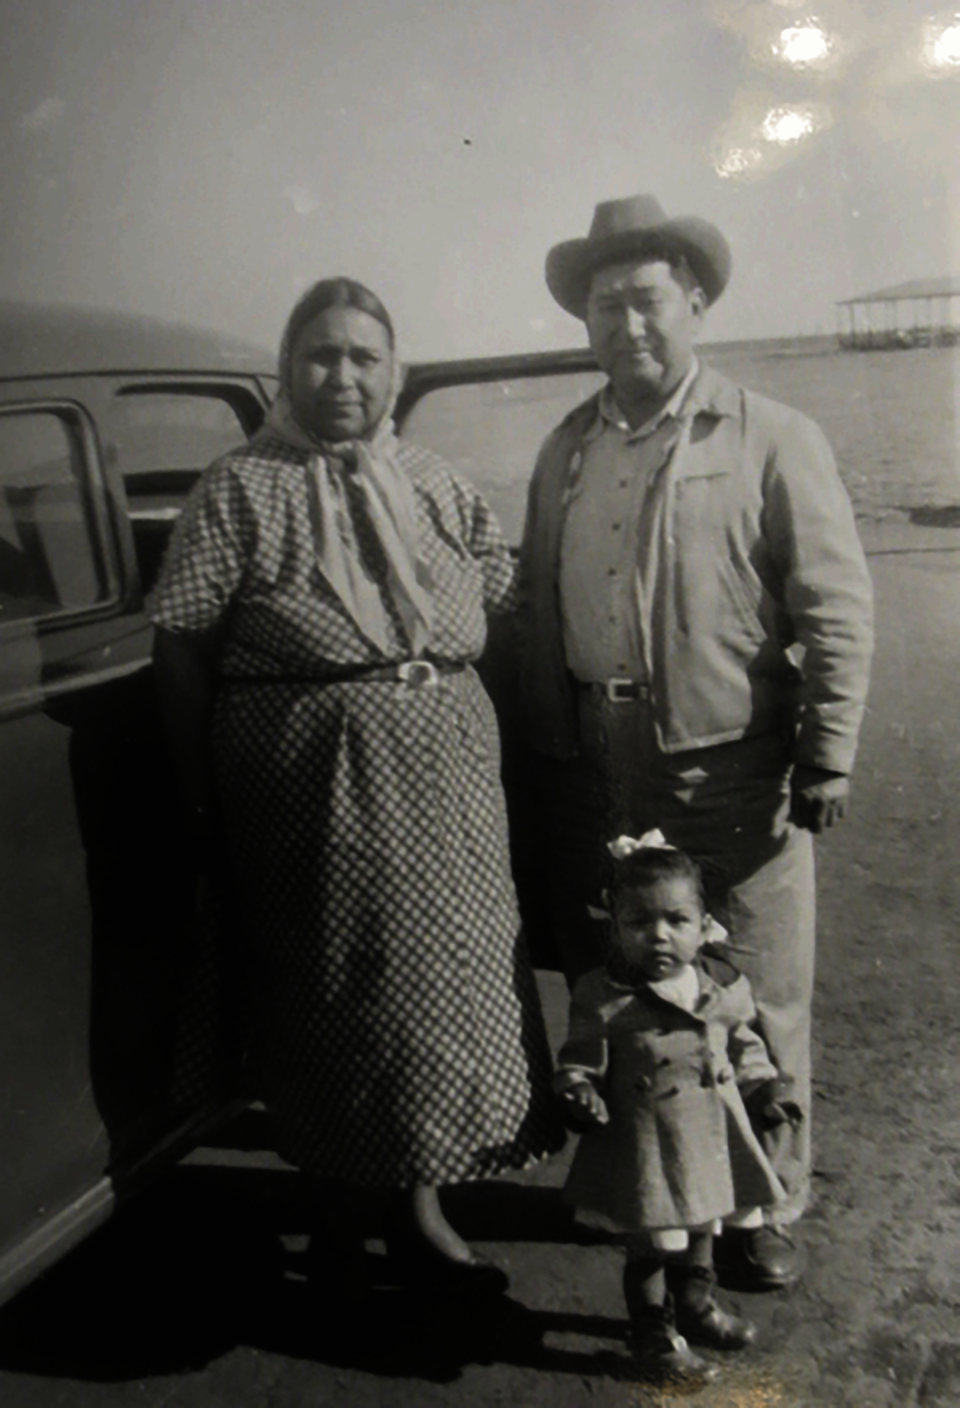 Black and white photo of an older couple with a young child, standing next to a car.